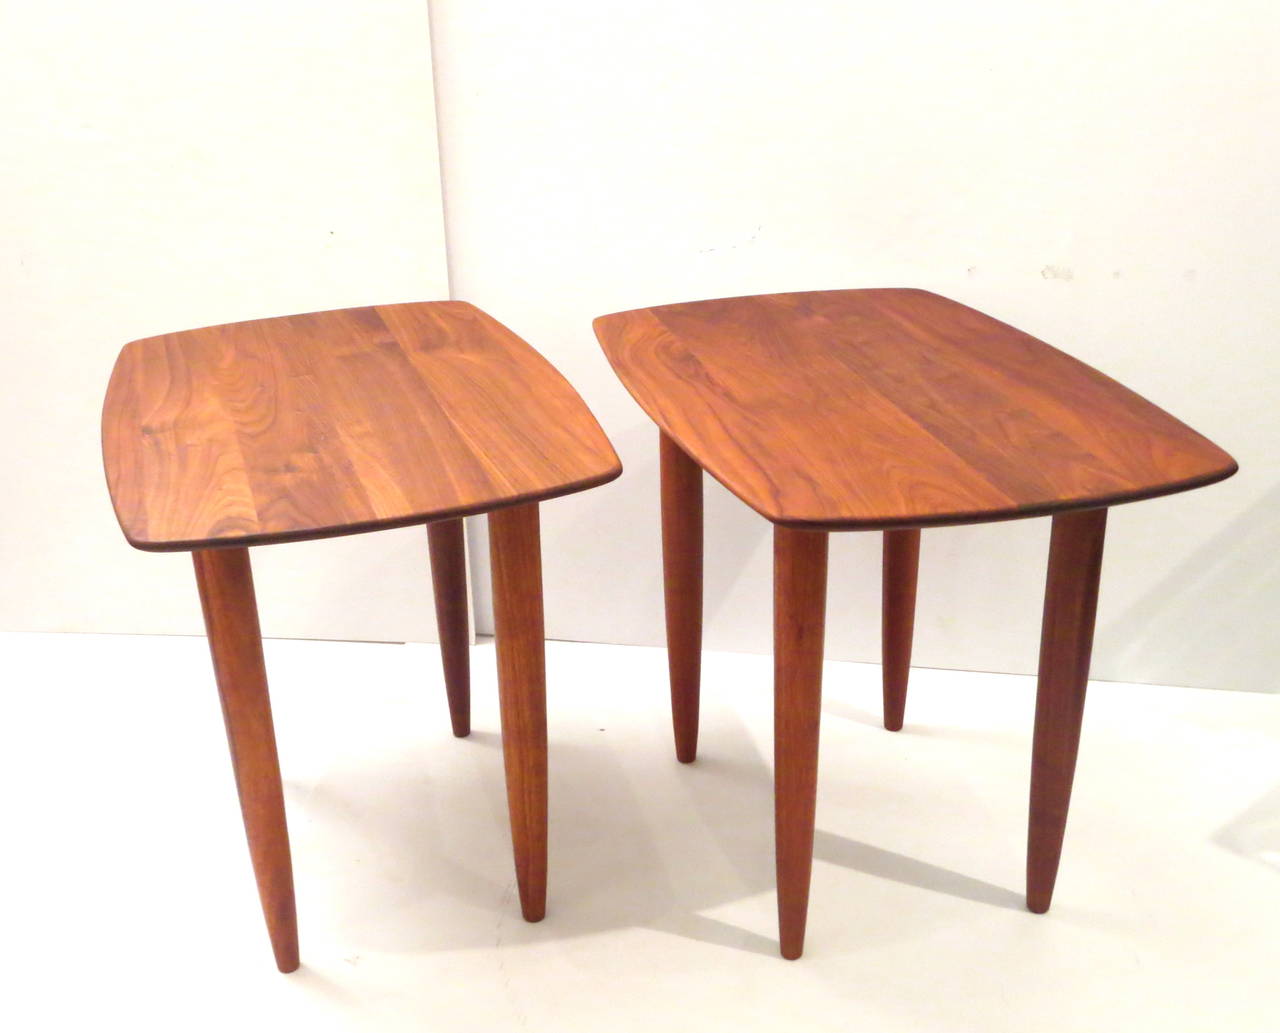 Great set of solid walnut end tables by Ace-Hi of California beveled edges part of the Prellude line, with soft rouded edge , freshly refinished circa 1960s.